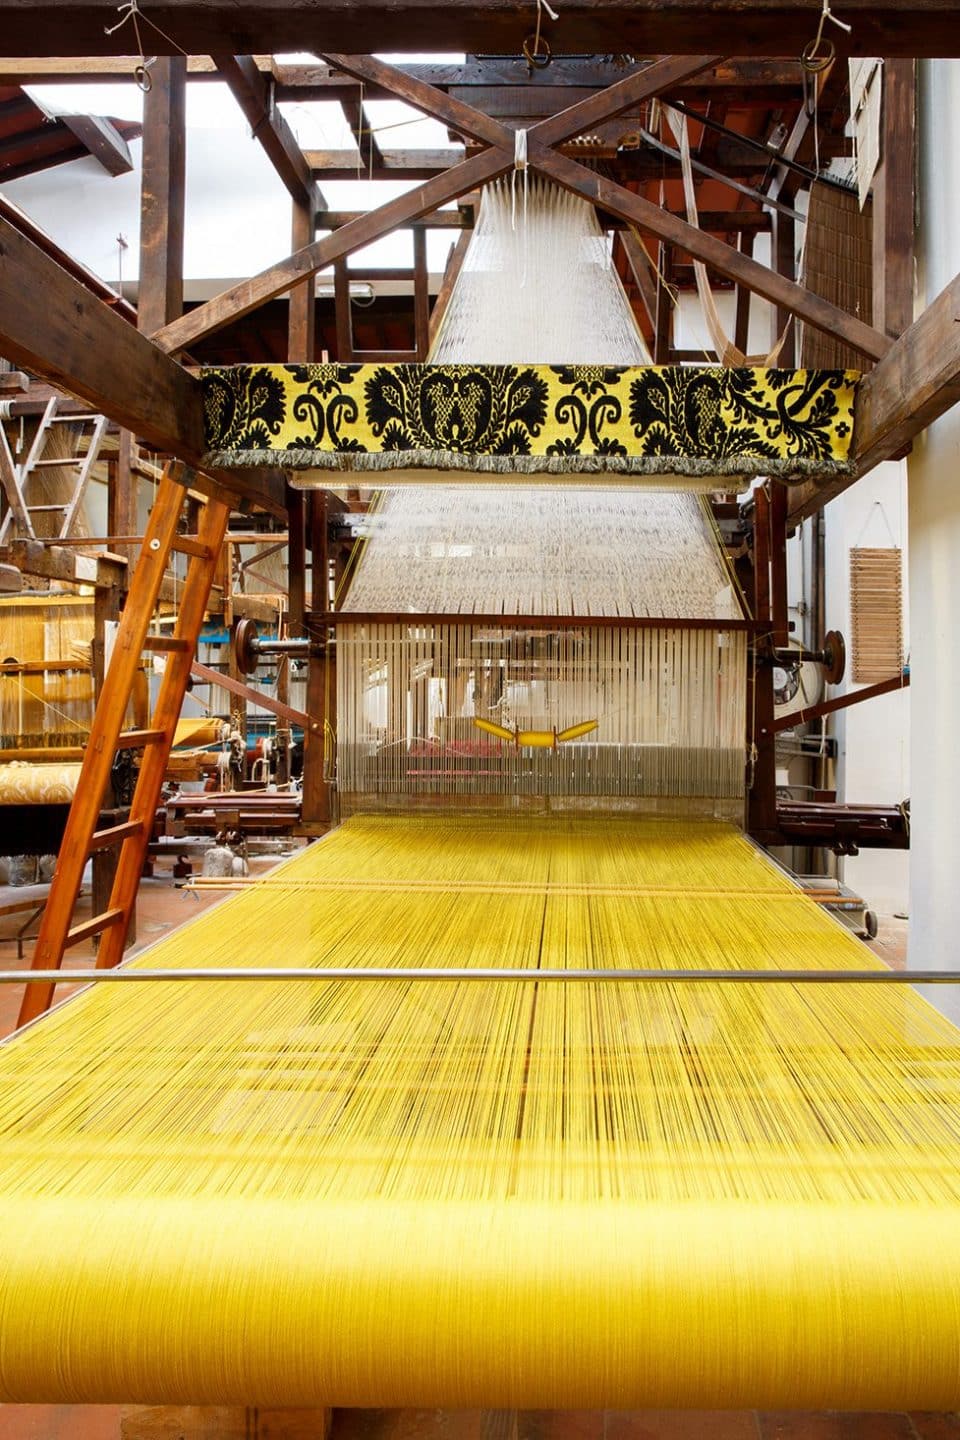 This Centuries-Old Florence Workshop Makes Fabrics for Elite Luxury Brands